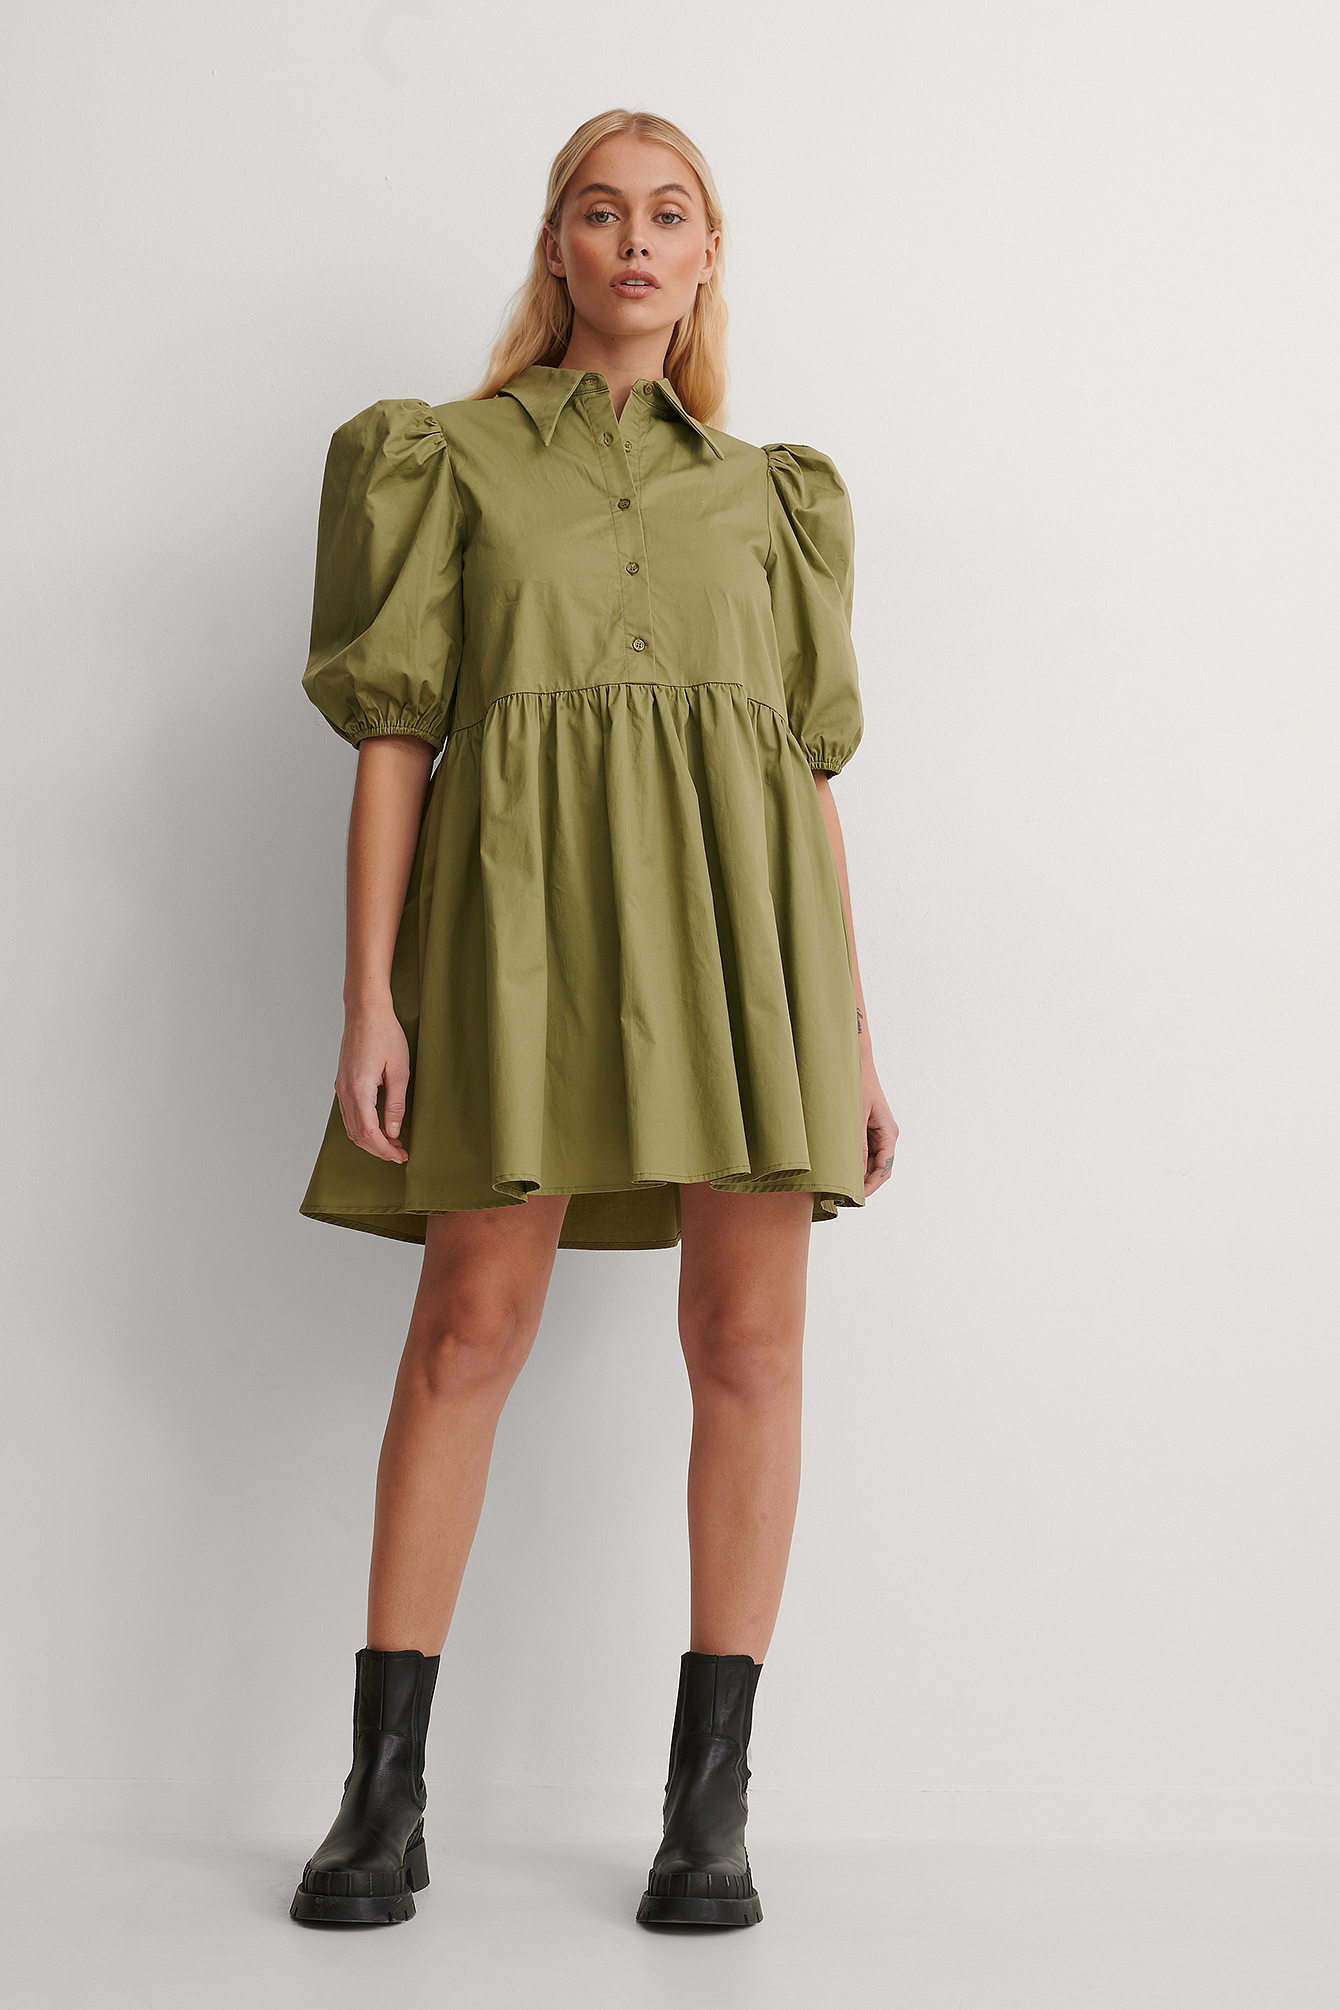 Pointy Collar Puff Sleeve Dress Outfit.